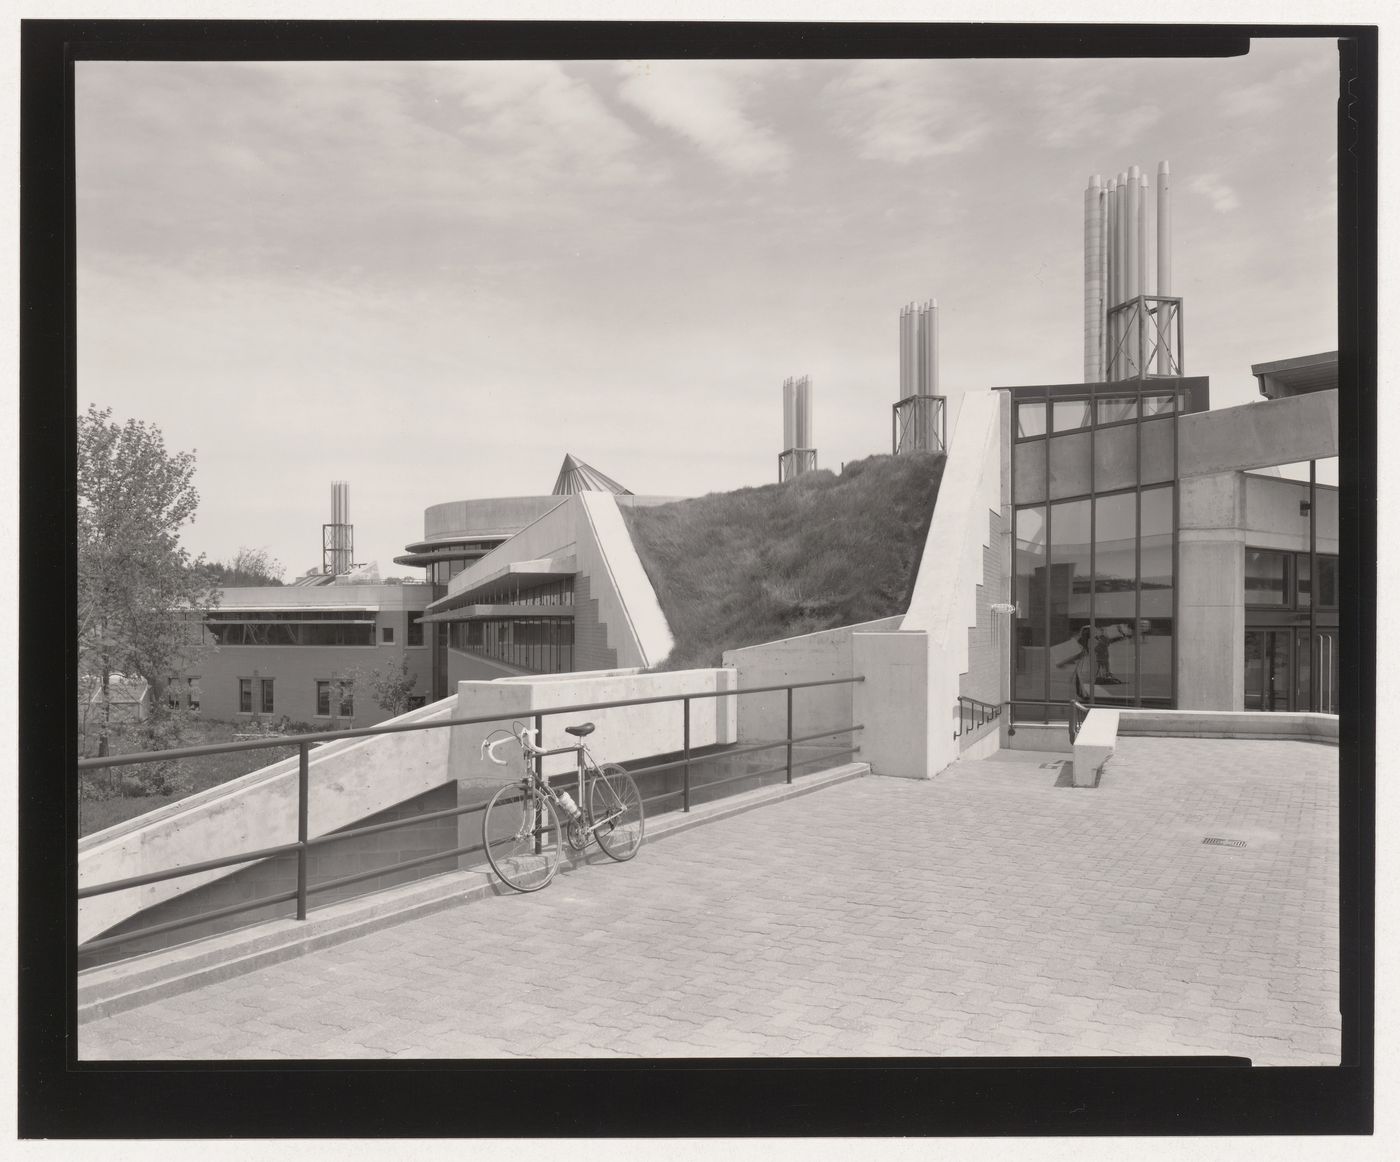 Environmental Sciences Building, Trent University, Peterborough, Ontario: View from the Concourse towards the Central Sphere, 1993